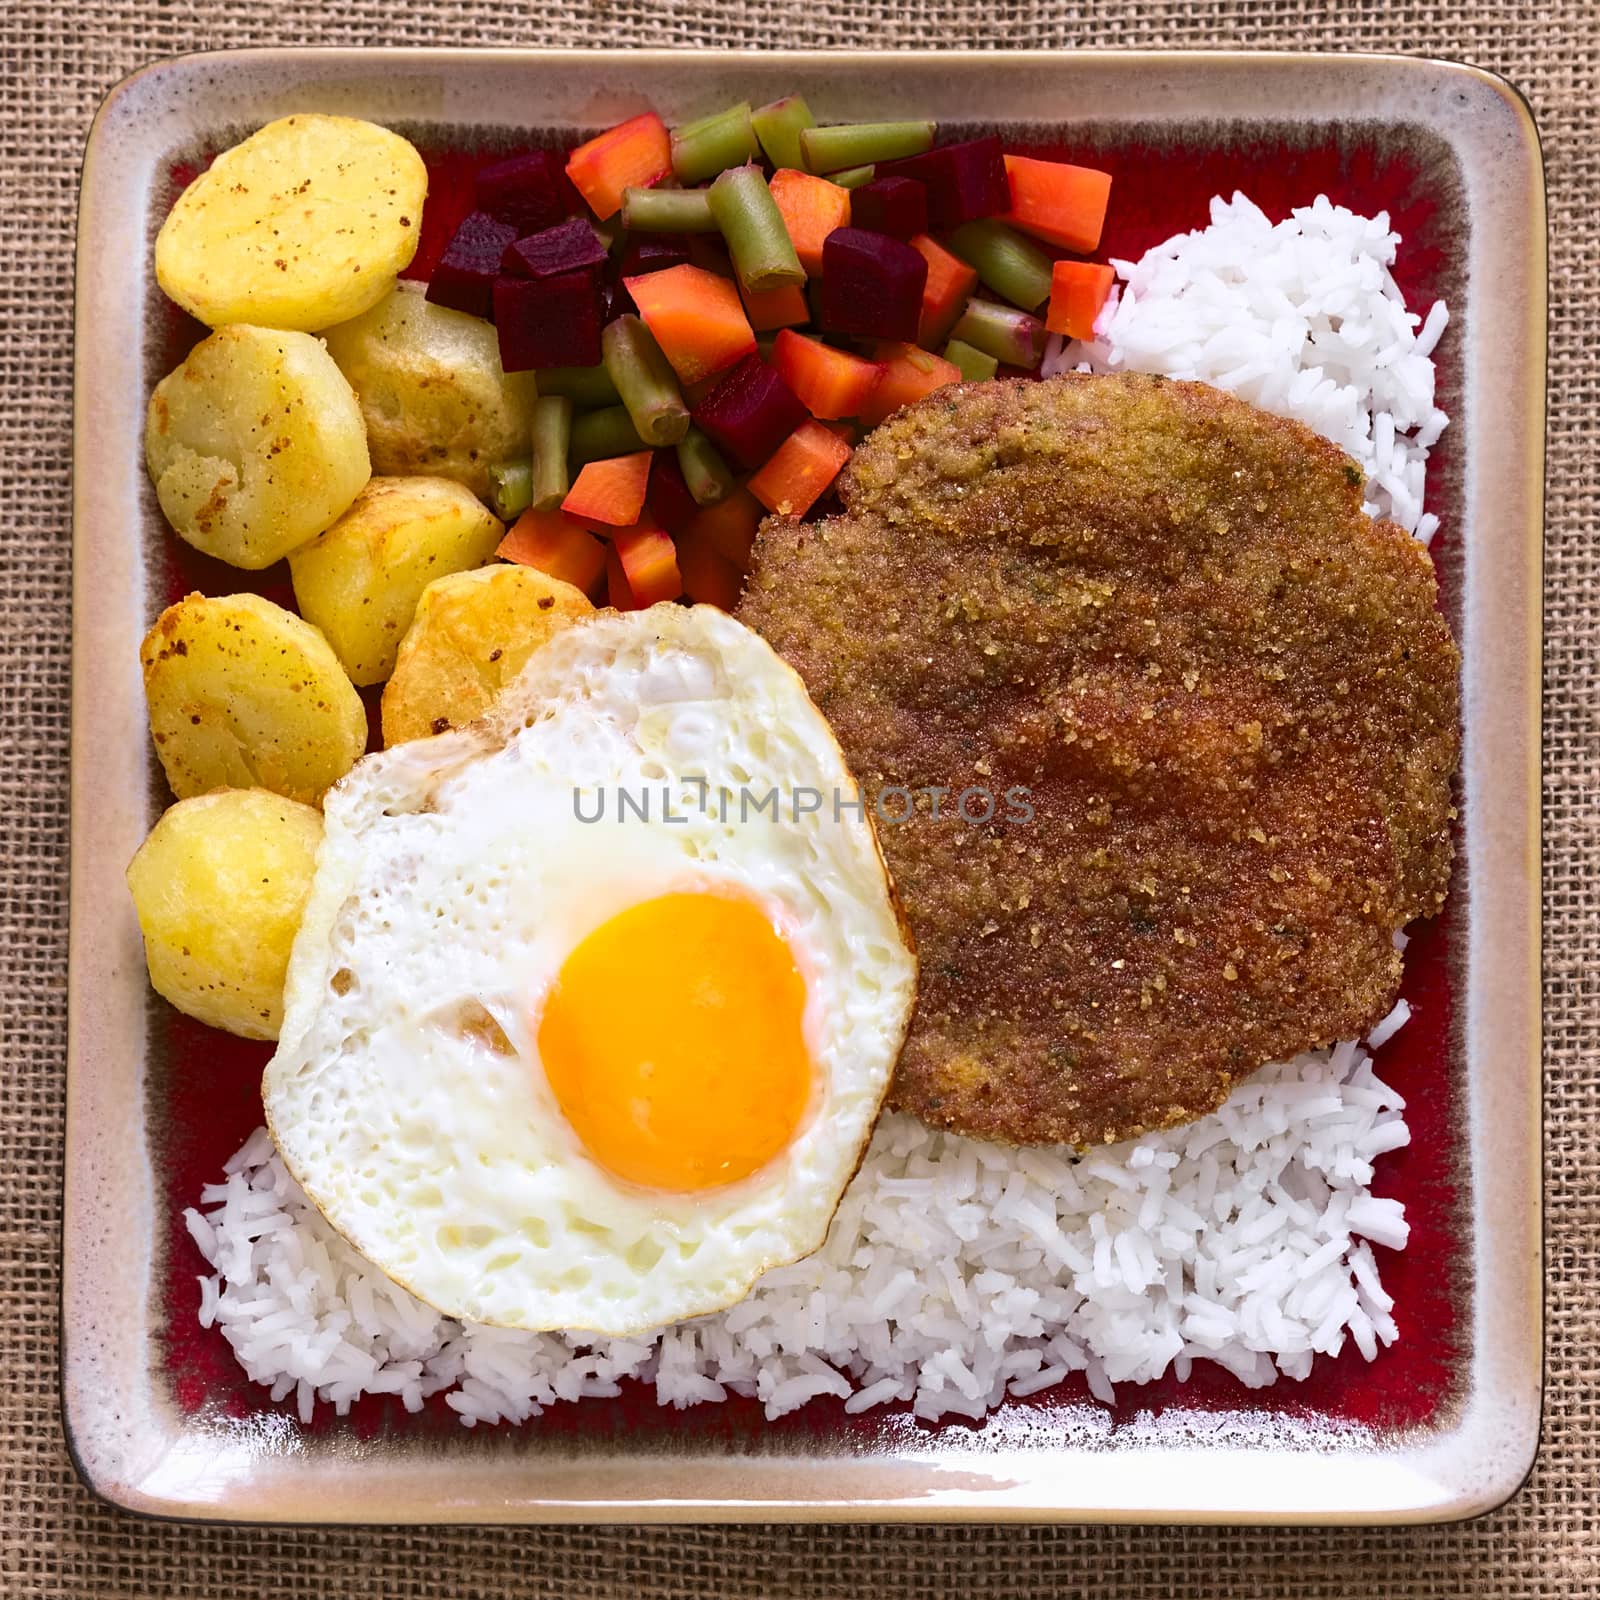 Overhead shot of traditional Bolivian dish called Silpancho, which is the name of the breaded flat, round piece of beef meat, served with fried egg, rice, fried potatoes and vegetables (carrot, bean, beetroot), photographed with natural light